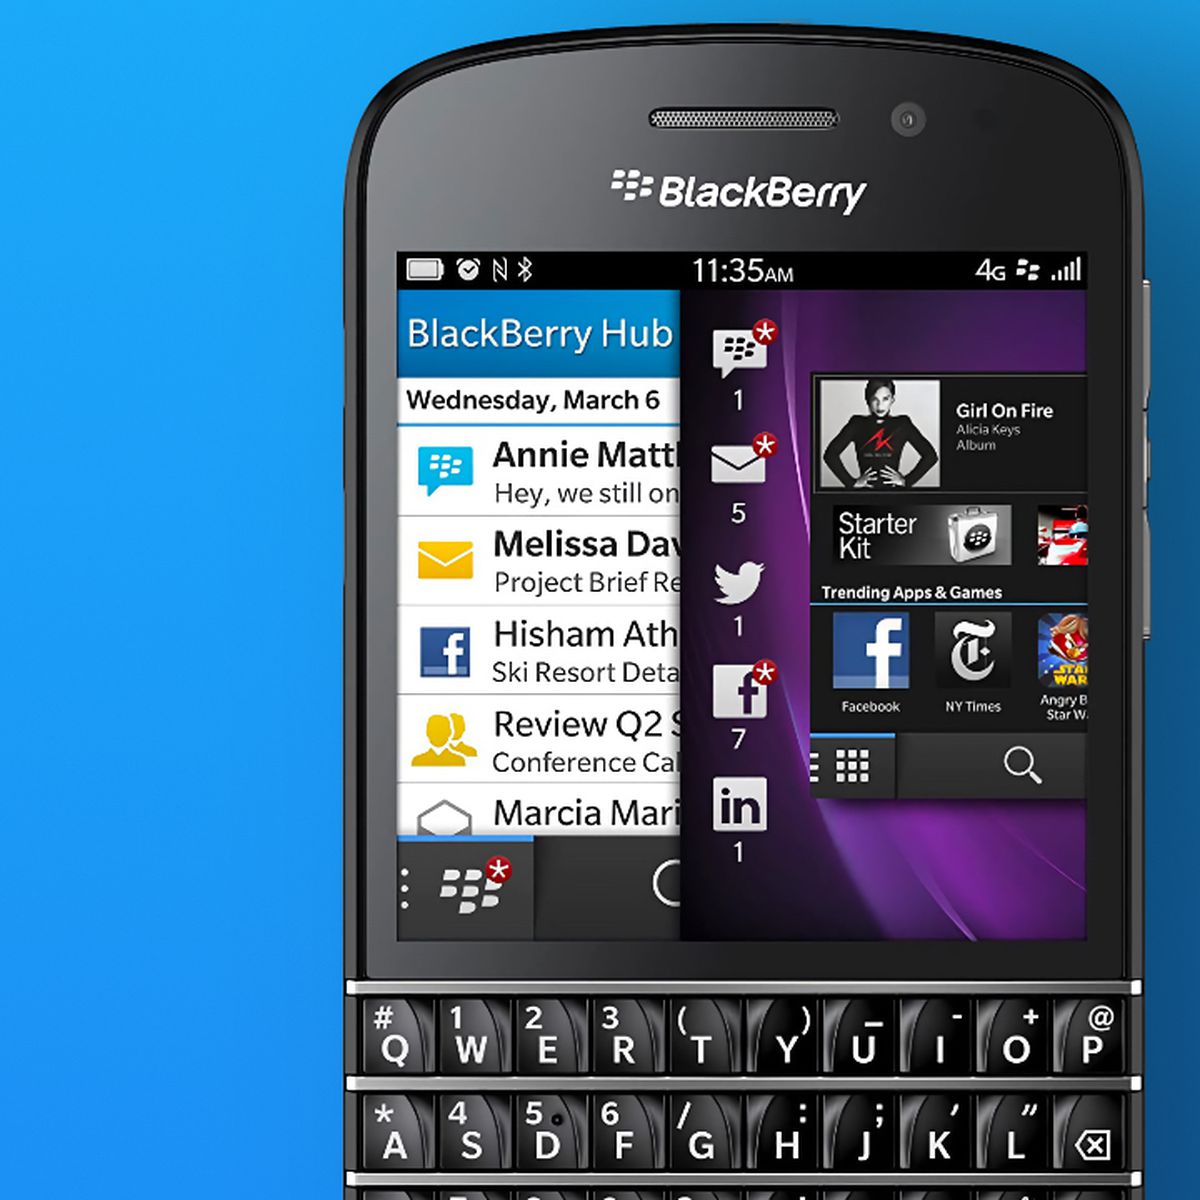 How the iPhone killed Blackberry (and why it didn't have to happen)